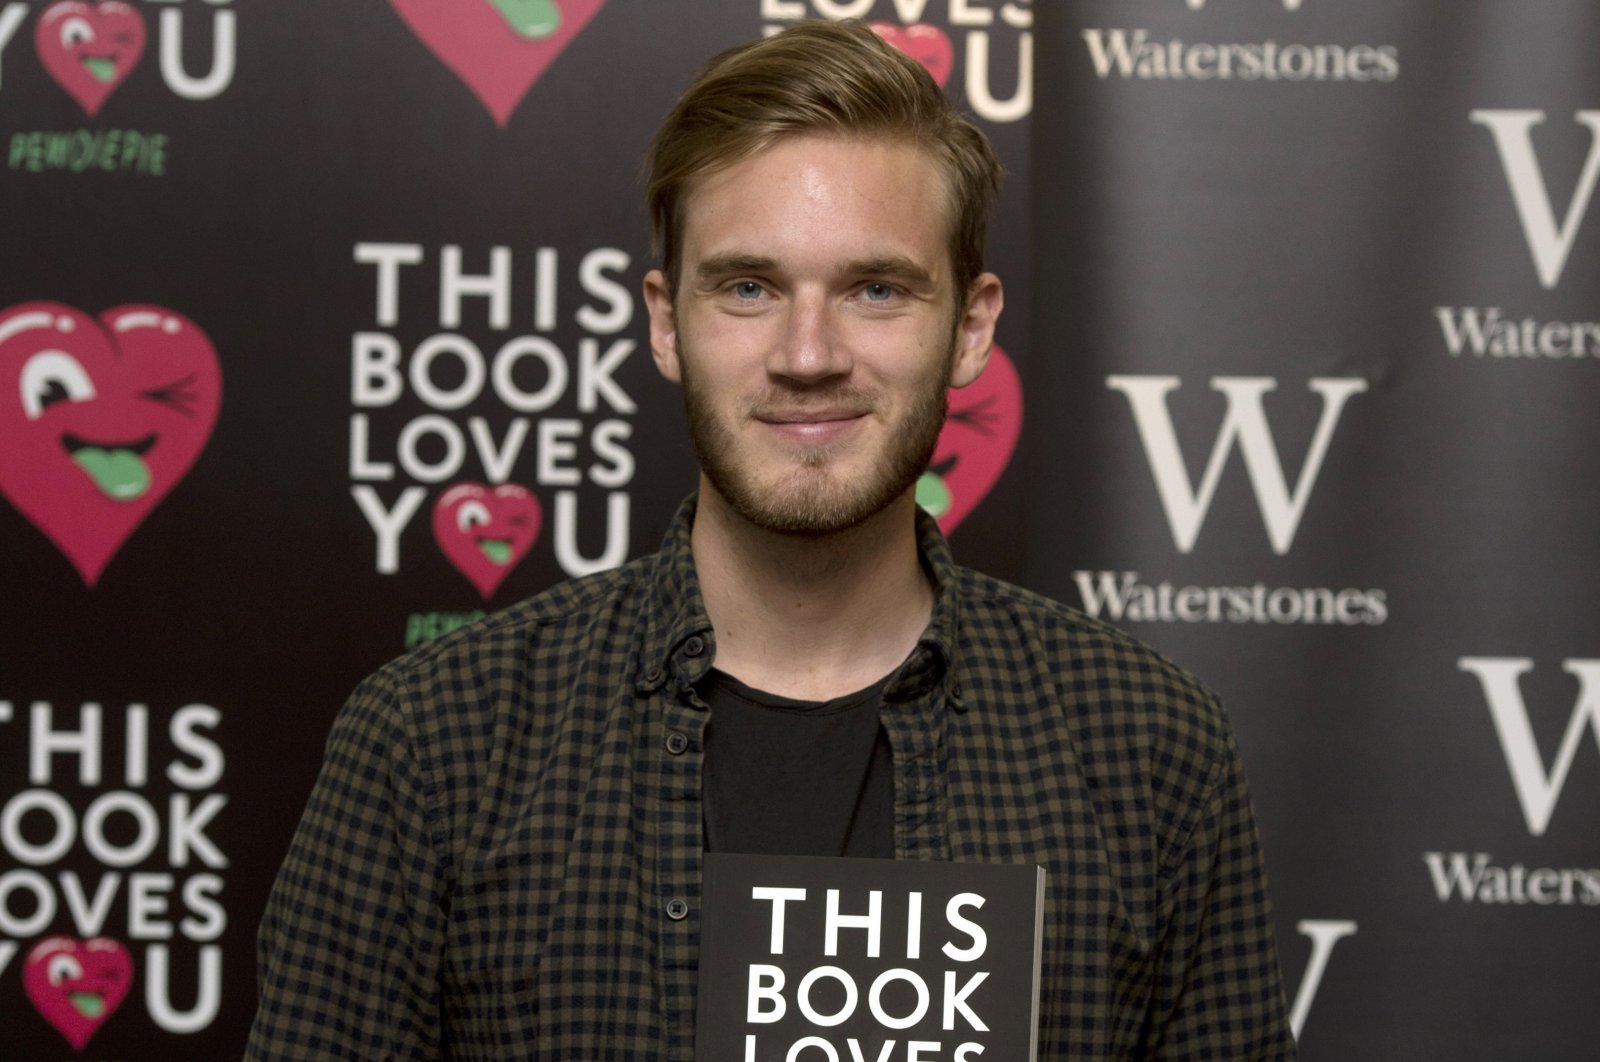 Felix Kjellberg, also known as PewDiePie, the most-subscribed YouTuber in the world during a photo call to launch his book &quot;This Book Loves You,&quot; at Waterstones Piccadilly, London, U.K., Oct. 18, 2015. (PA Images via Reuters)